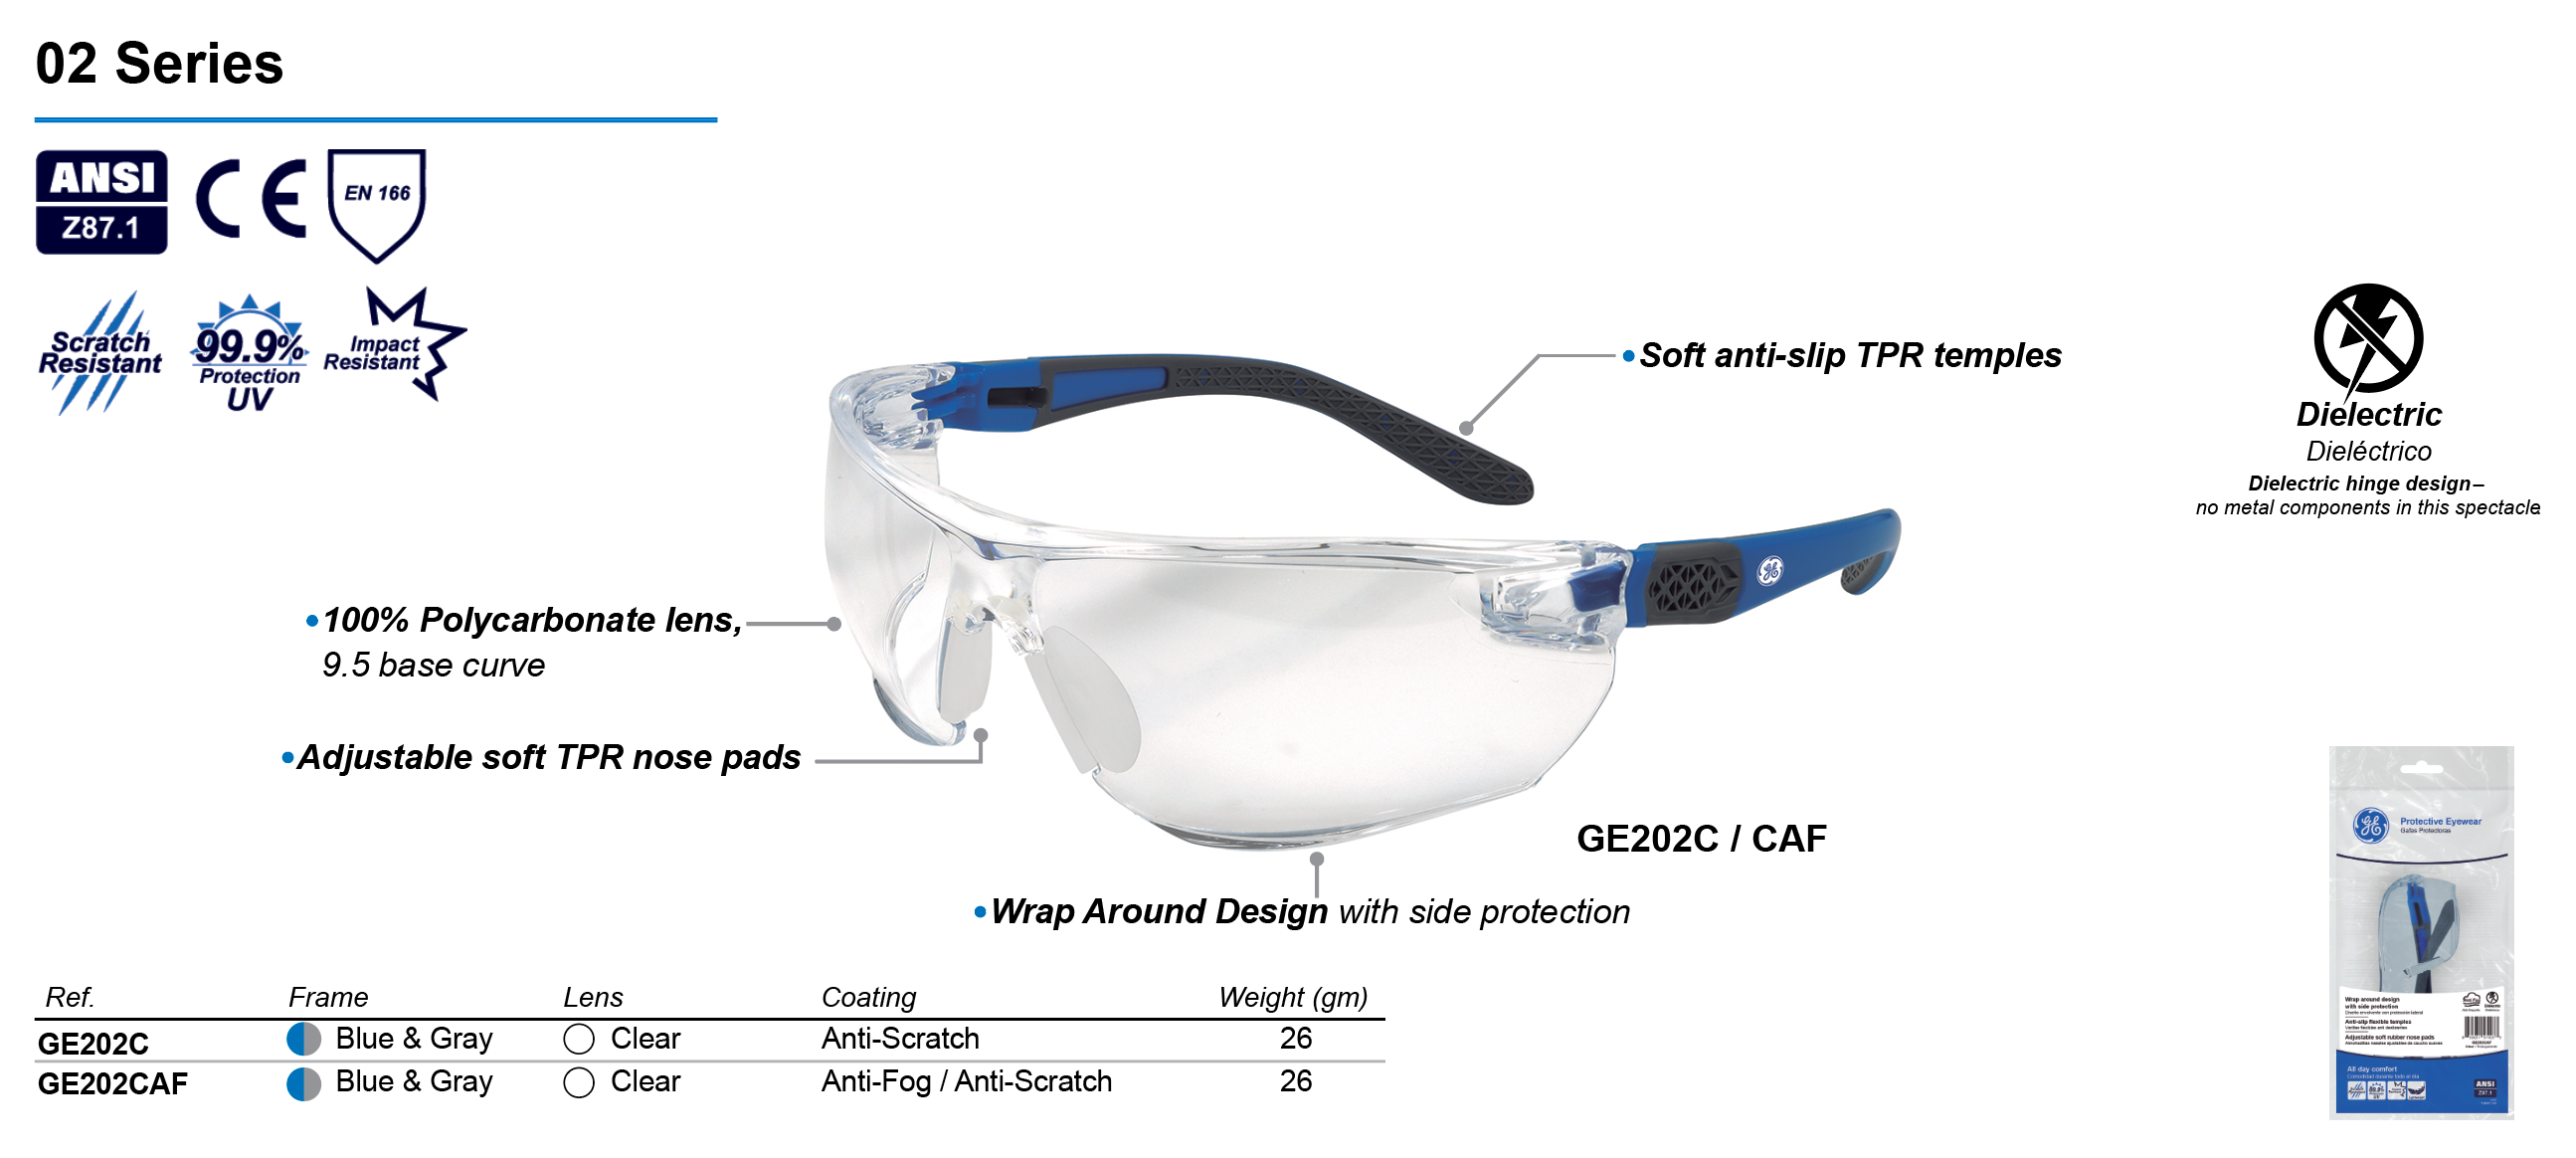 GE PPE - Protective Eyewear - 02 Series Frameless Safety Glasses -  #GE202